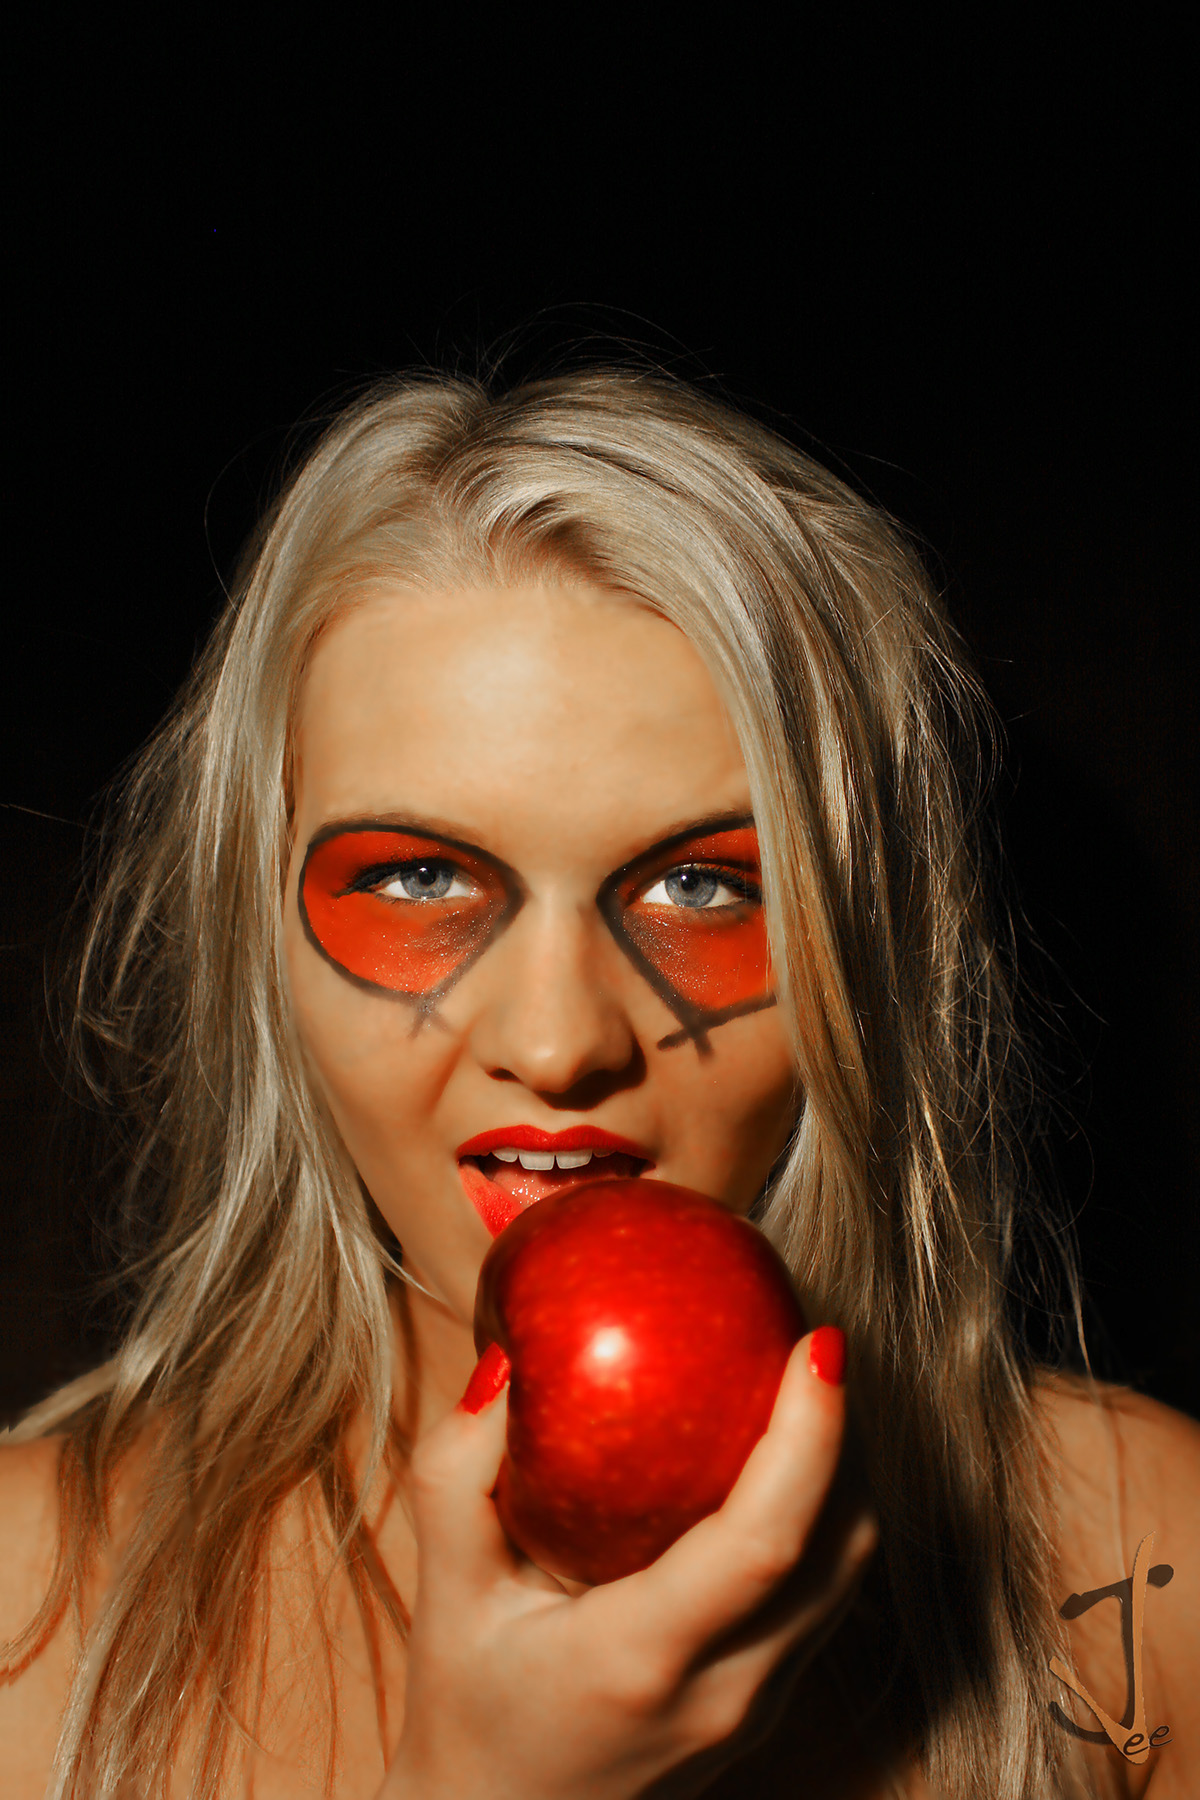 Fun Fruit portrait color emotion makeup nude sexy cute Anger sad blue yellow green red